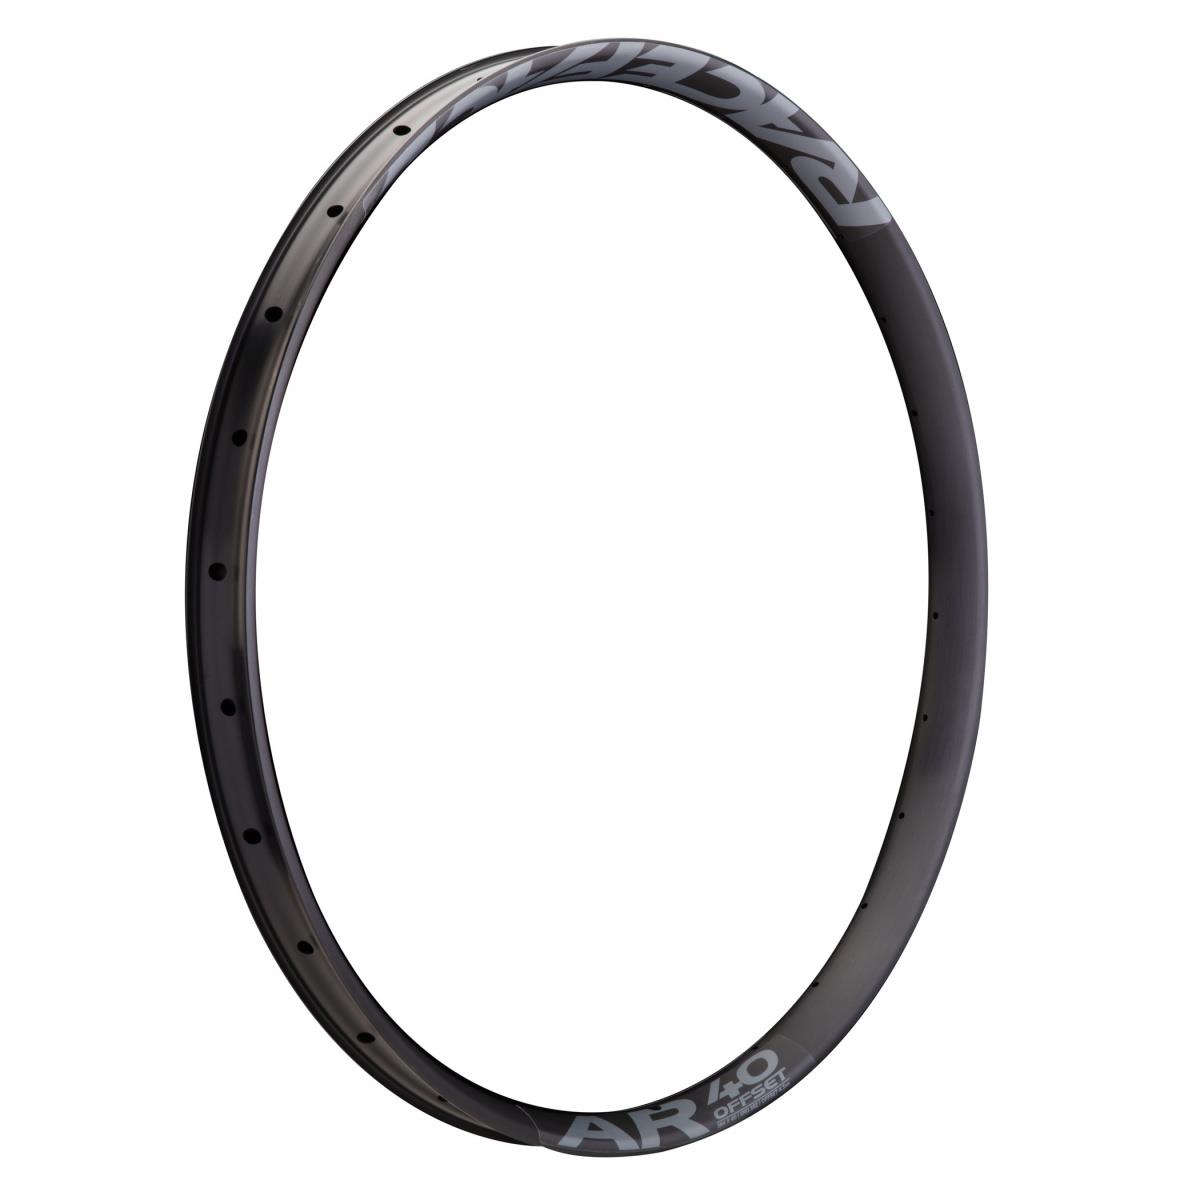 Race Face Jante MTB Ar Offset 40 Black/Grey, 27.5 Inches x 40 mm